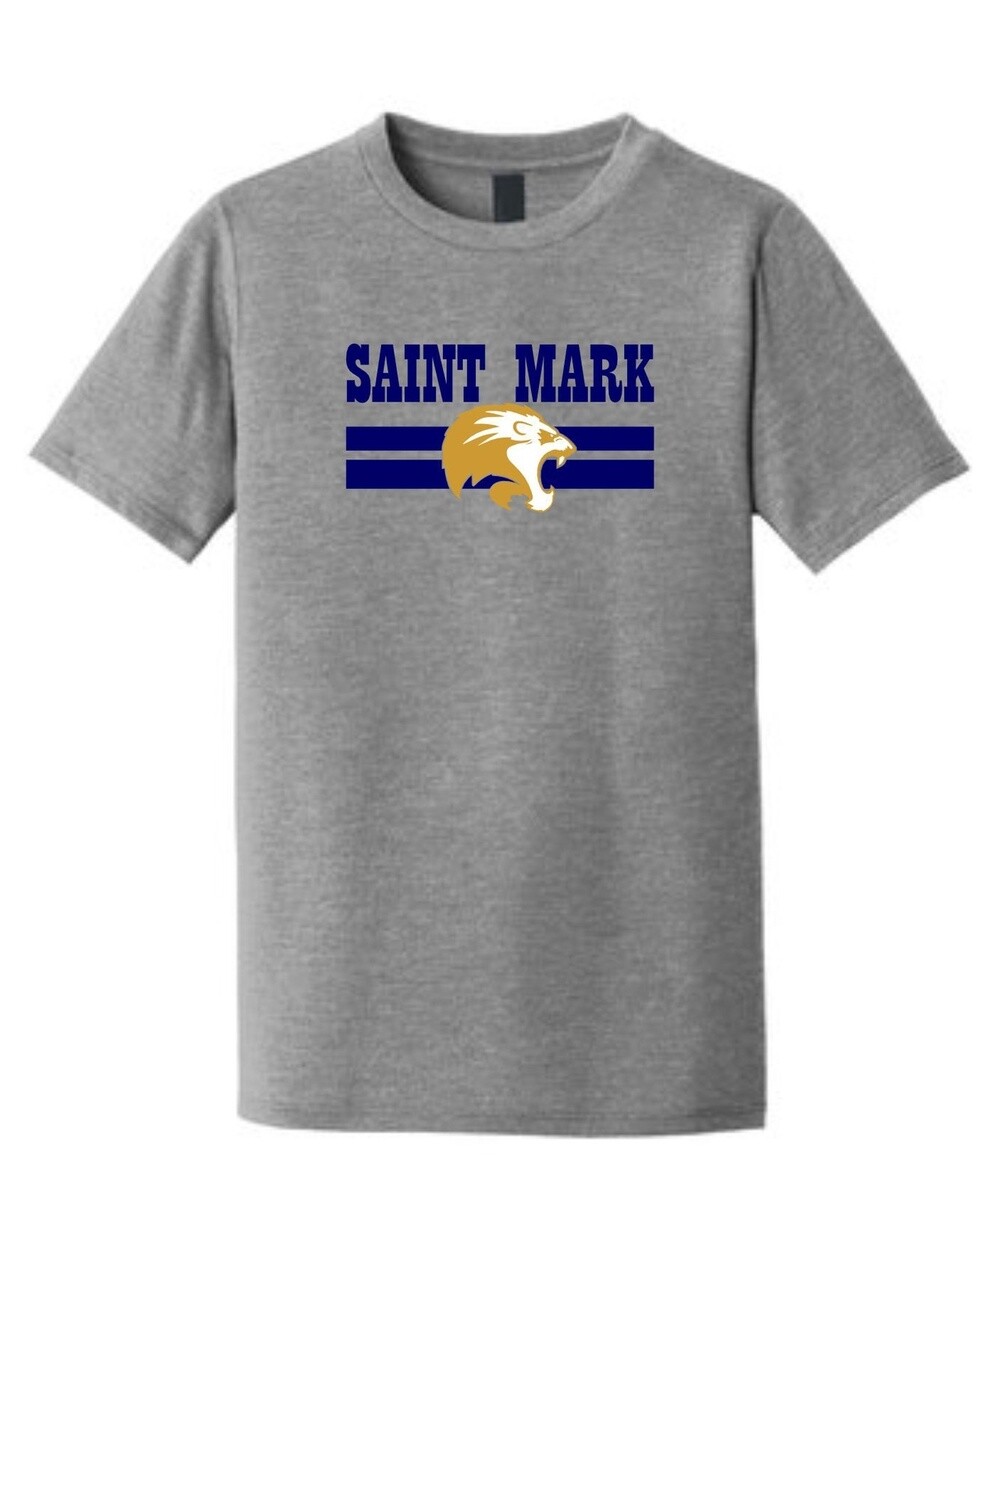 St. Mark Youth Tee, Size: XS-DT130Y, Colour: TriGreyFrost